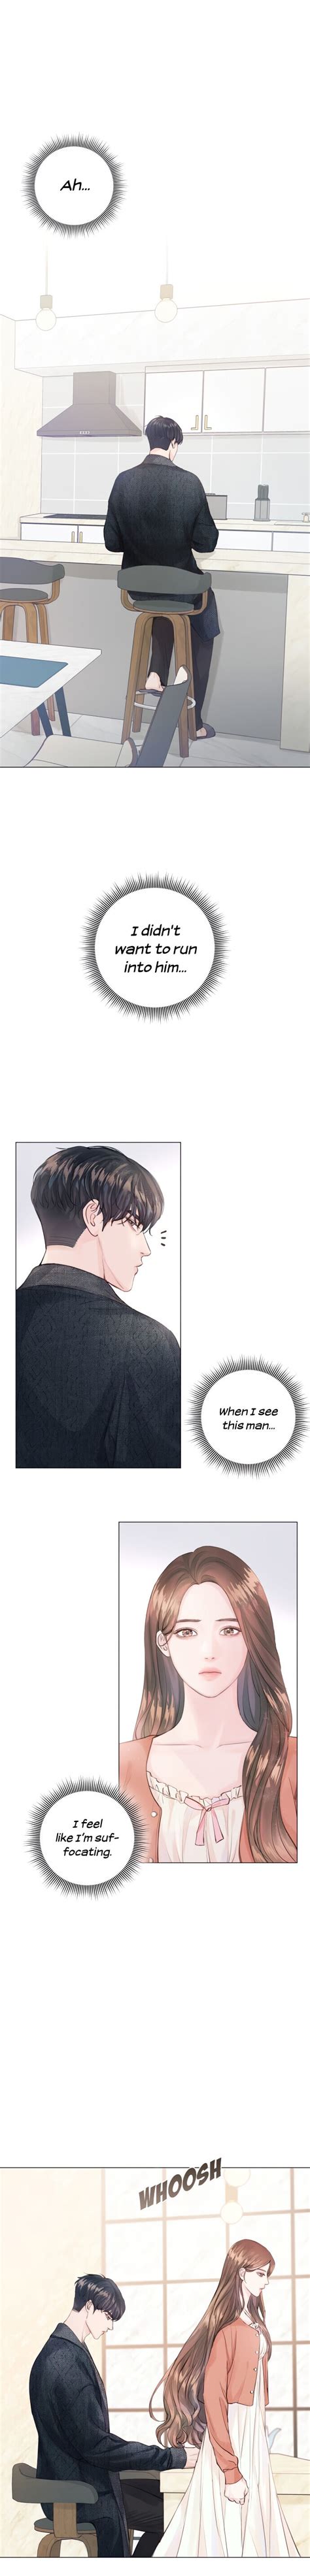 There must be happy endings ; Surely a Happy Ending - Chapter 1 - 1ST KISS MANHUA